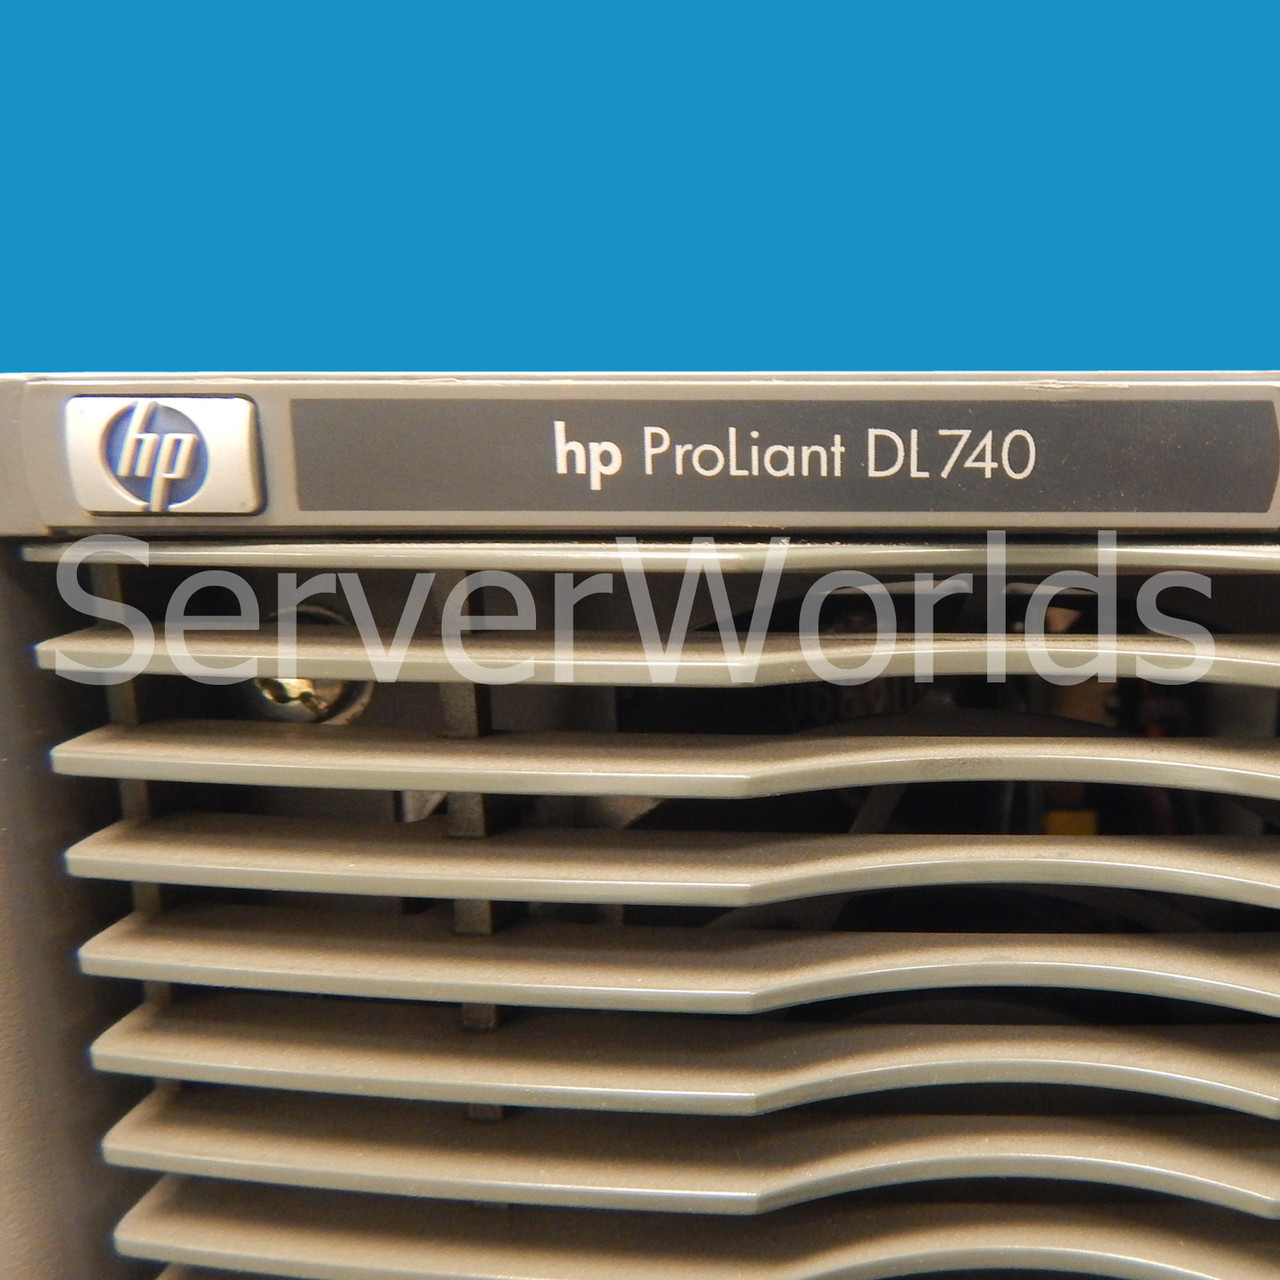 HP DL740 will build to order DL740